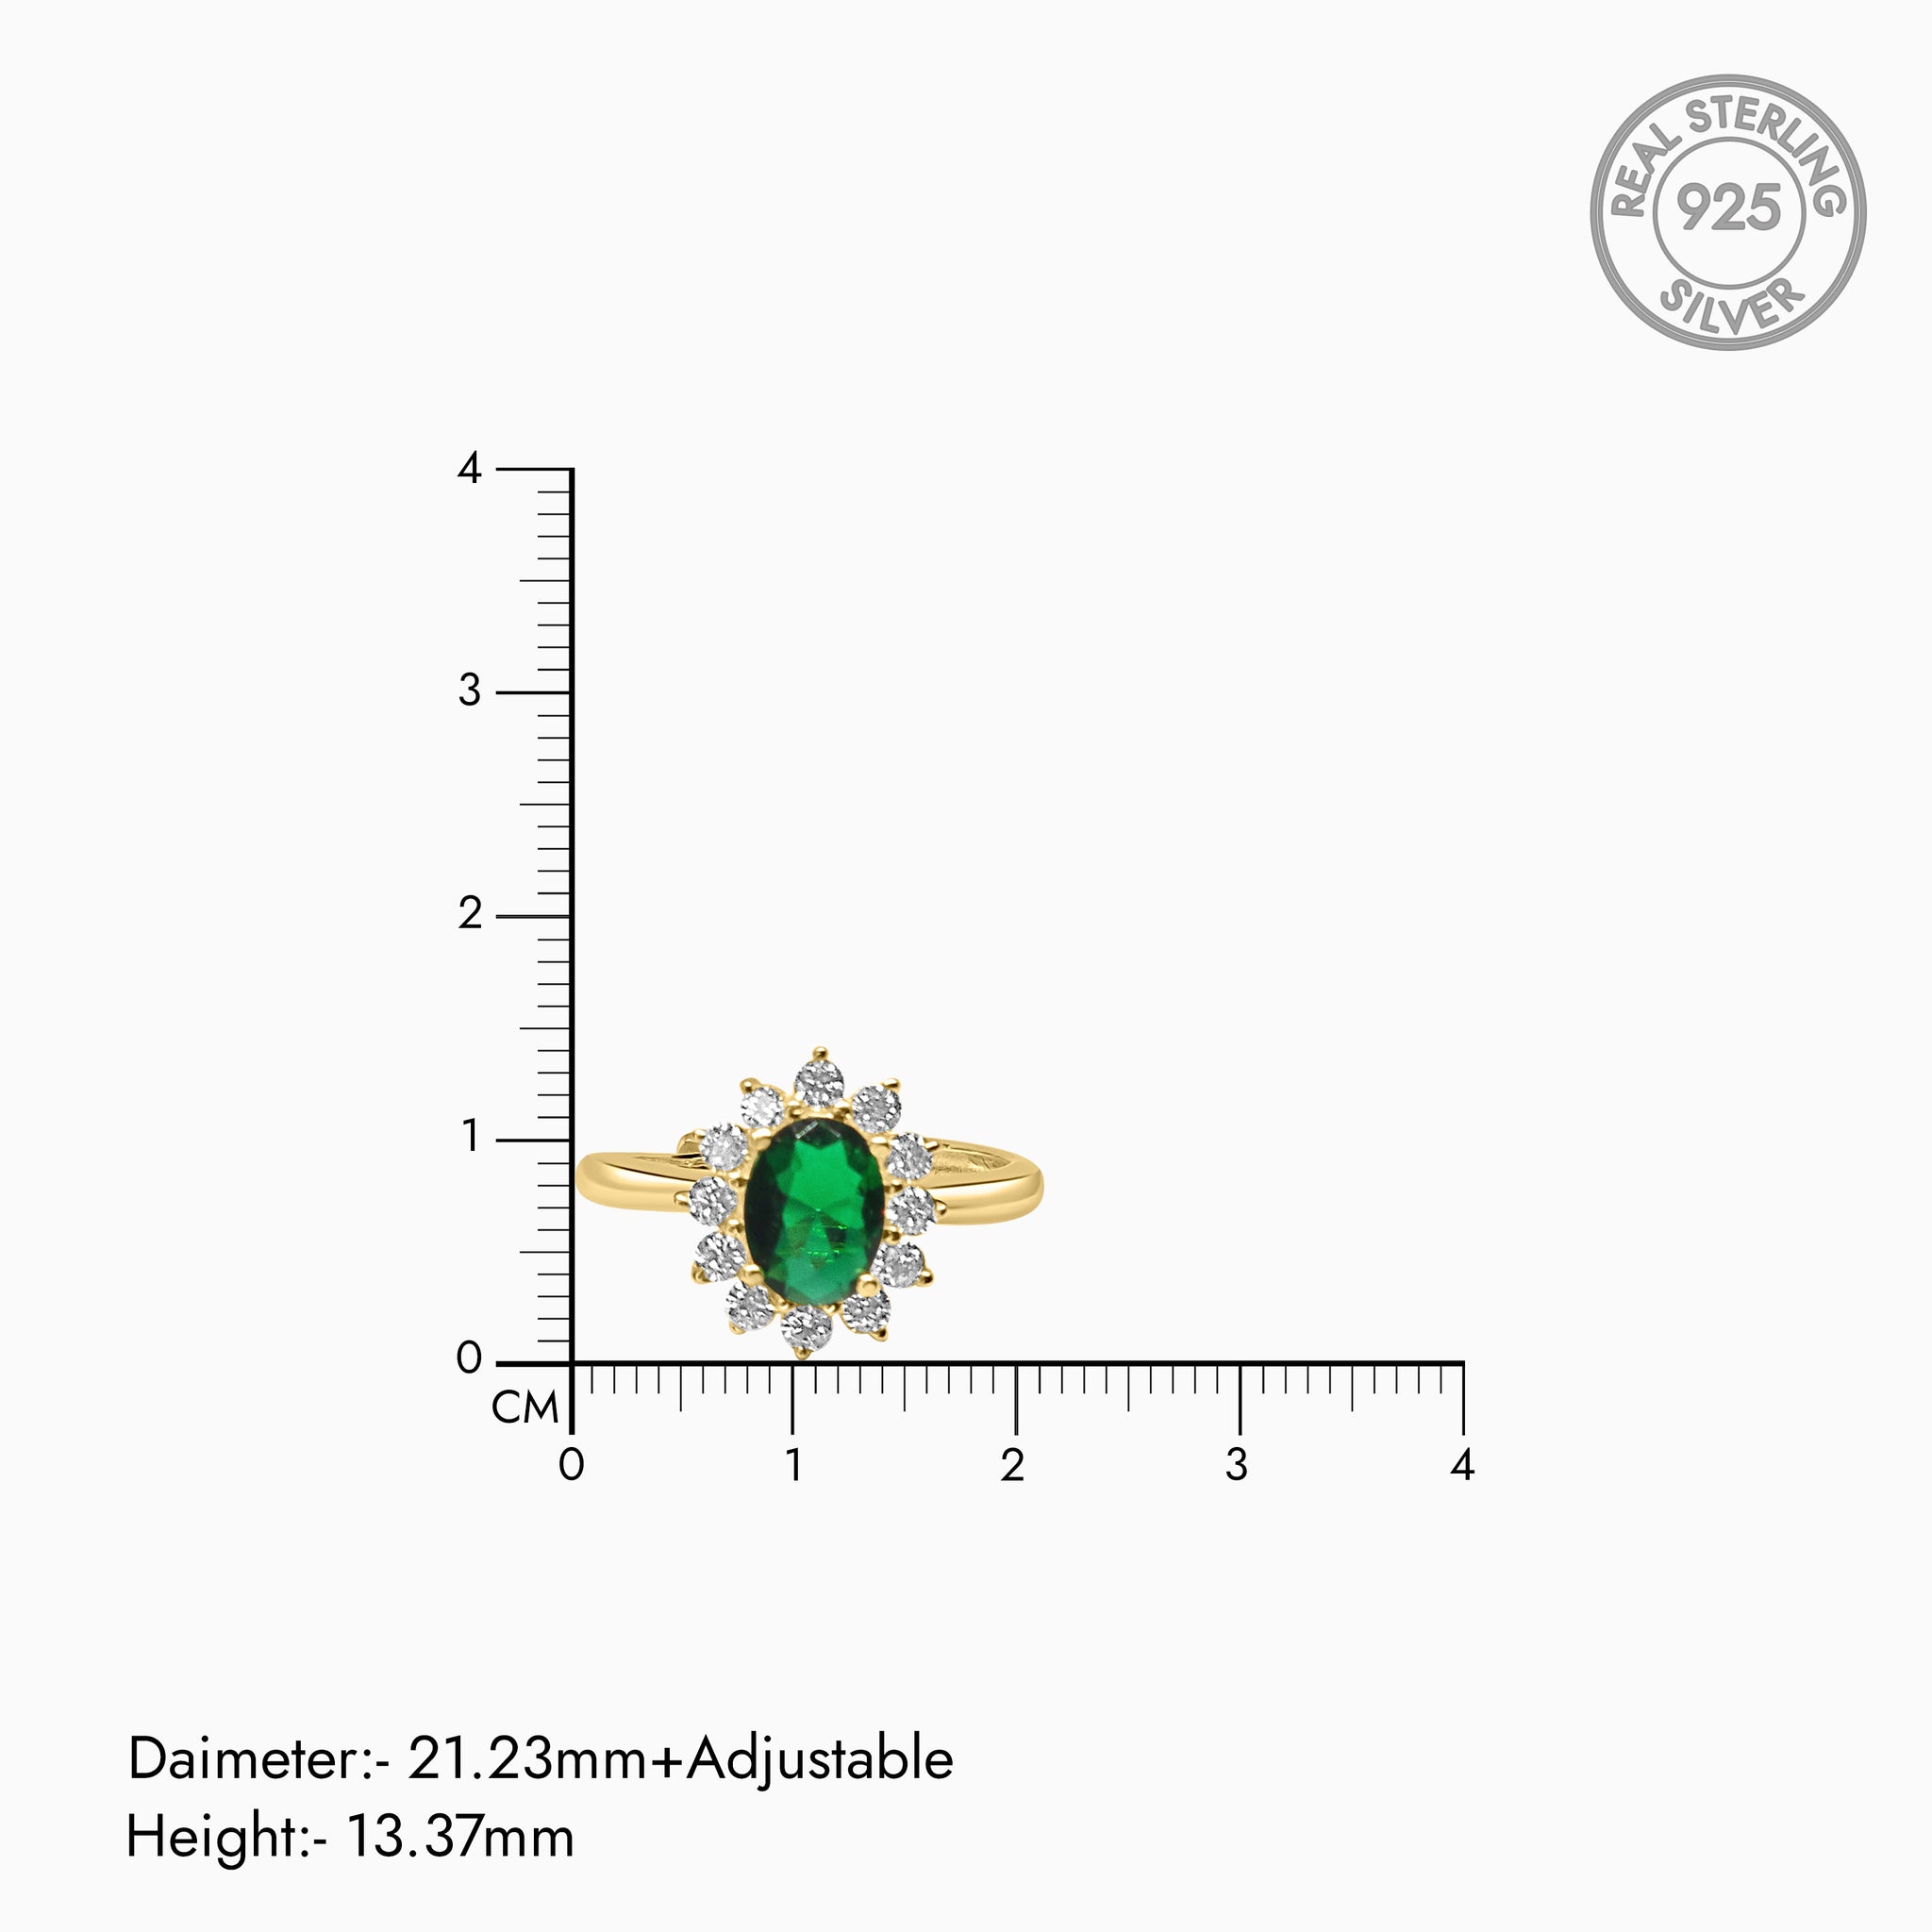 Silver Gold Sparkling Emerald Green Flower Ring